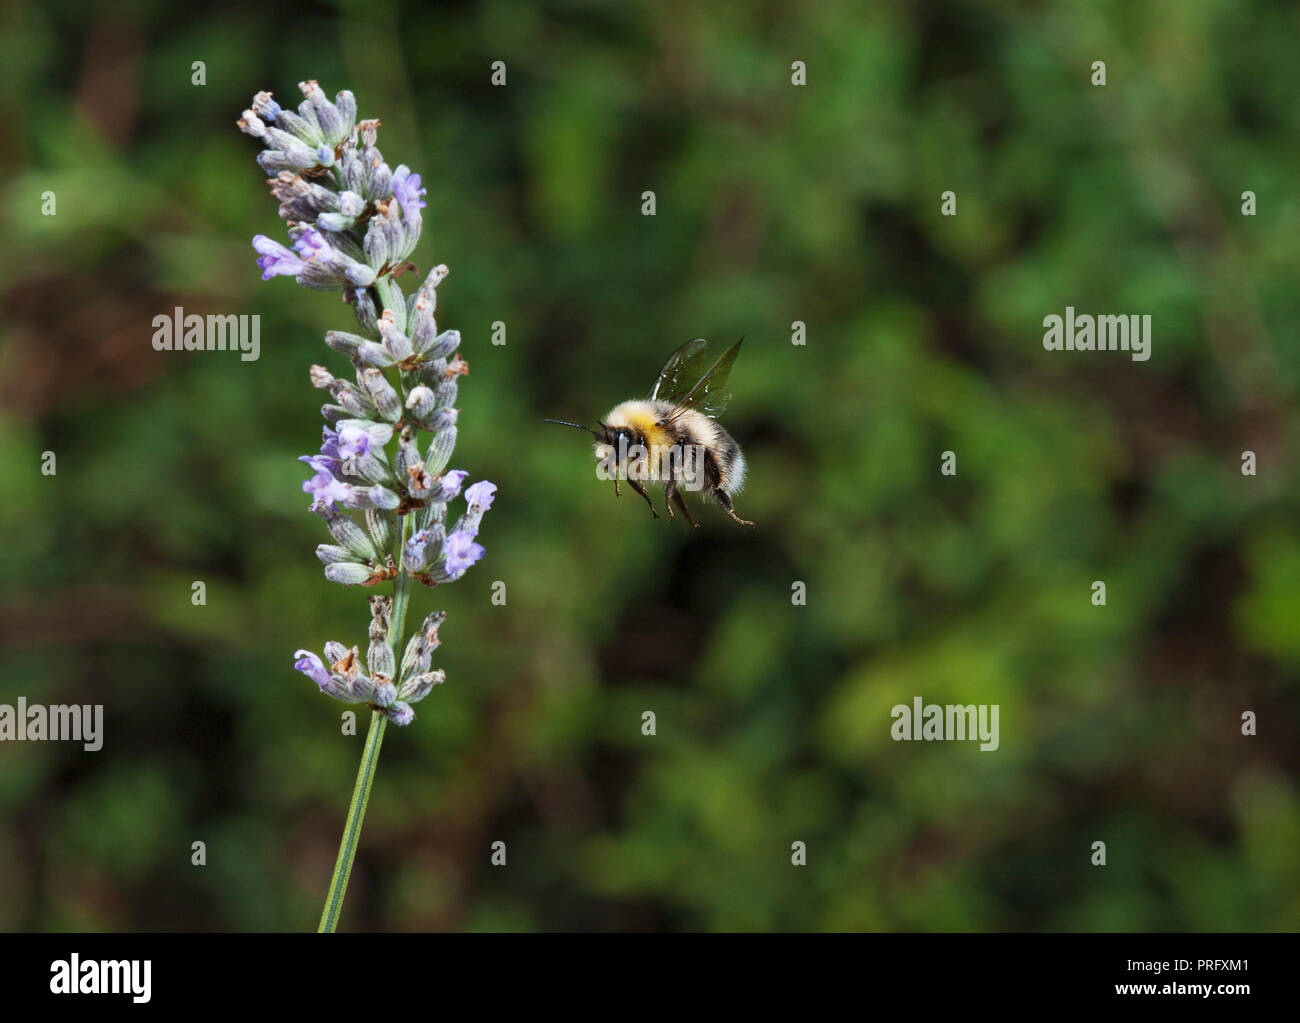 Bumble bee approaching lavender flower Stock Photo